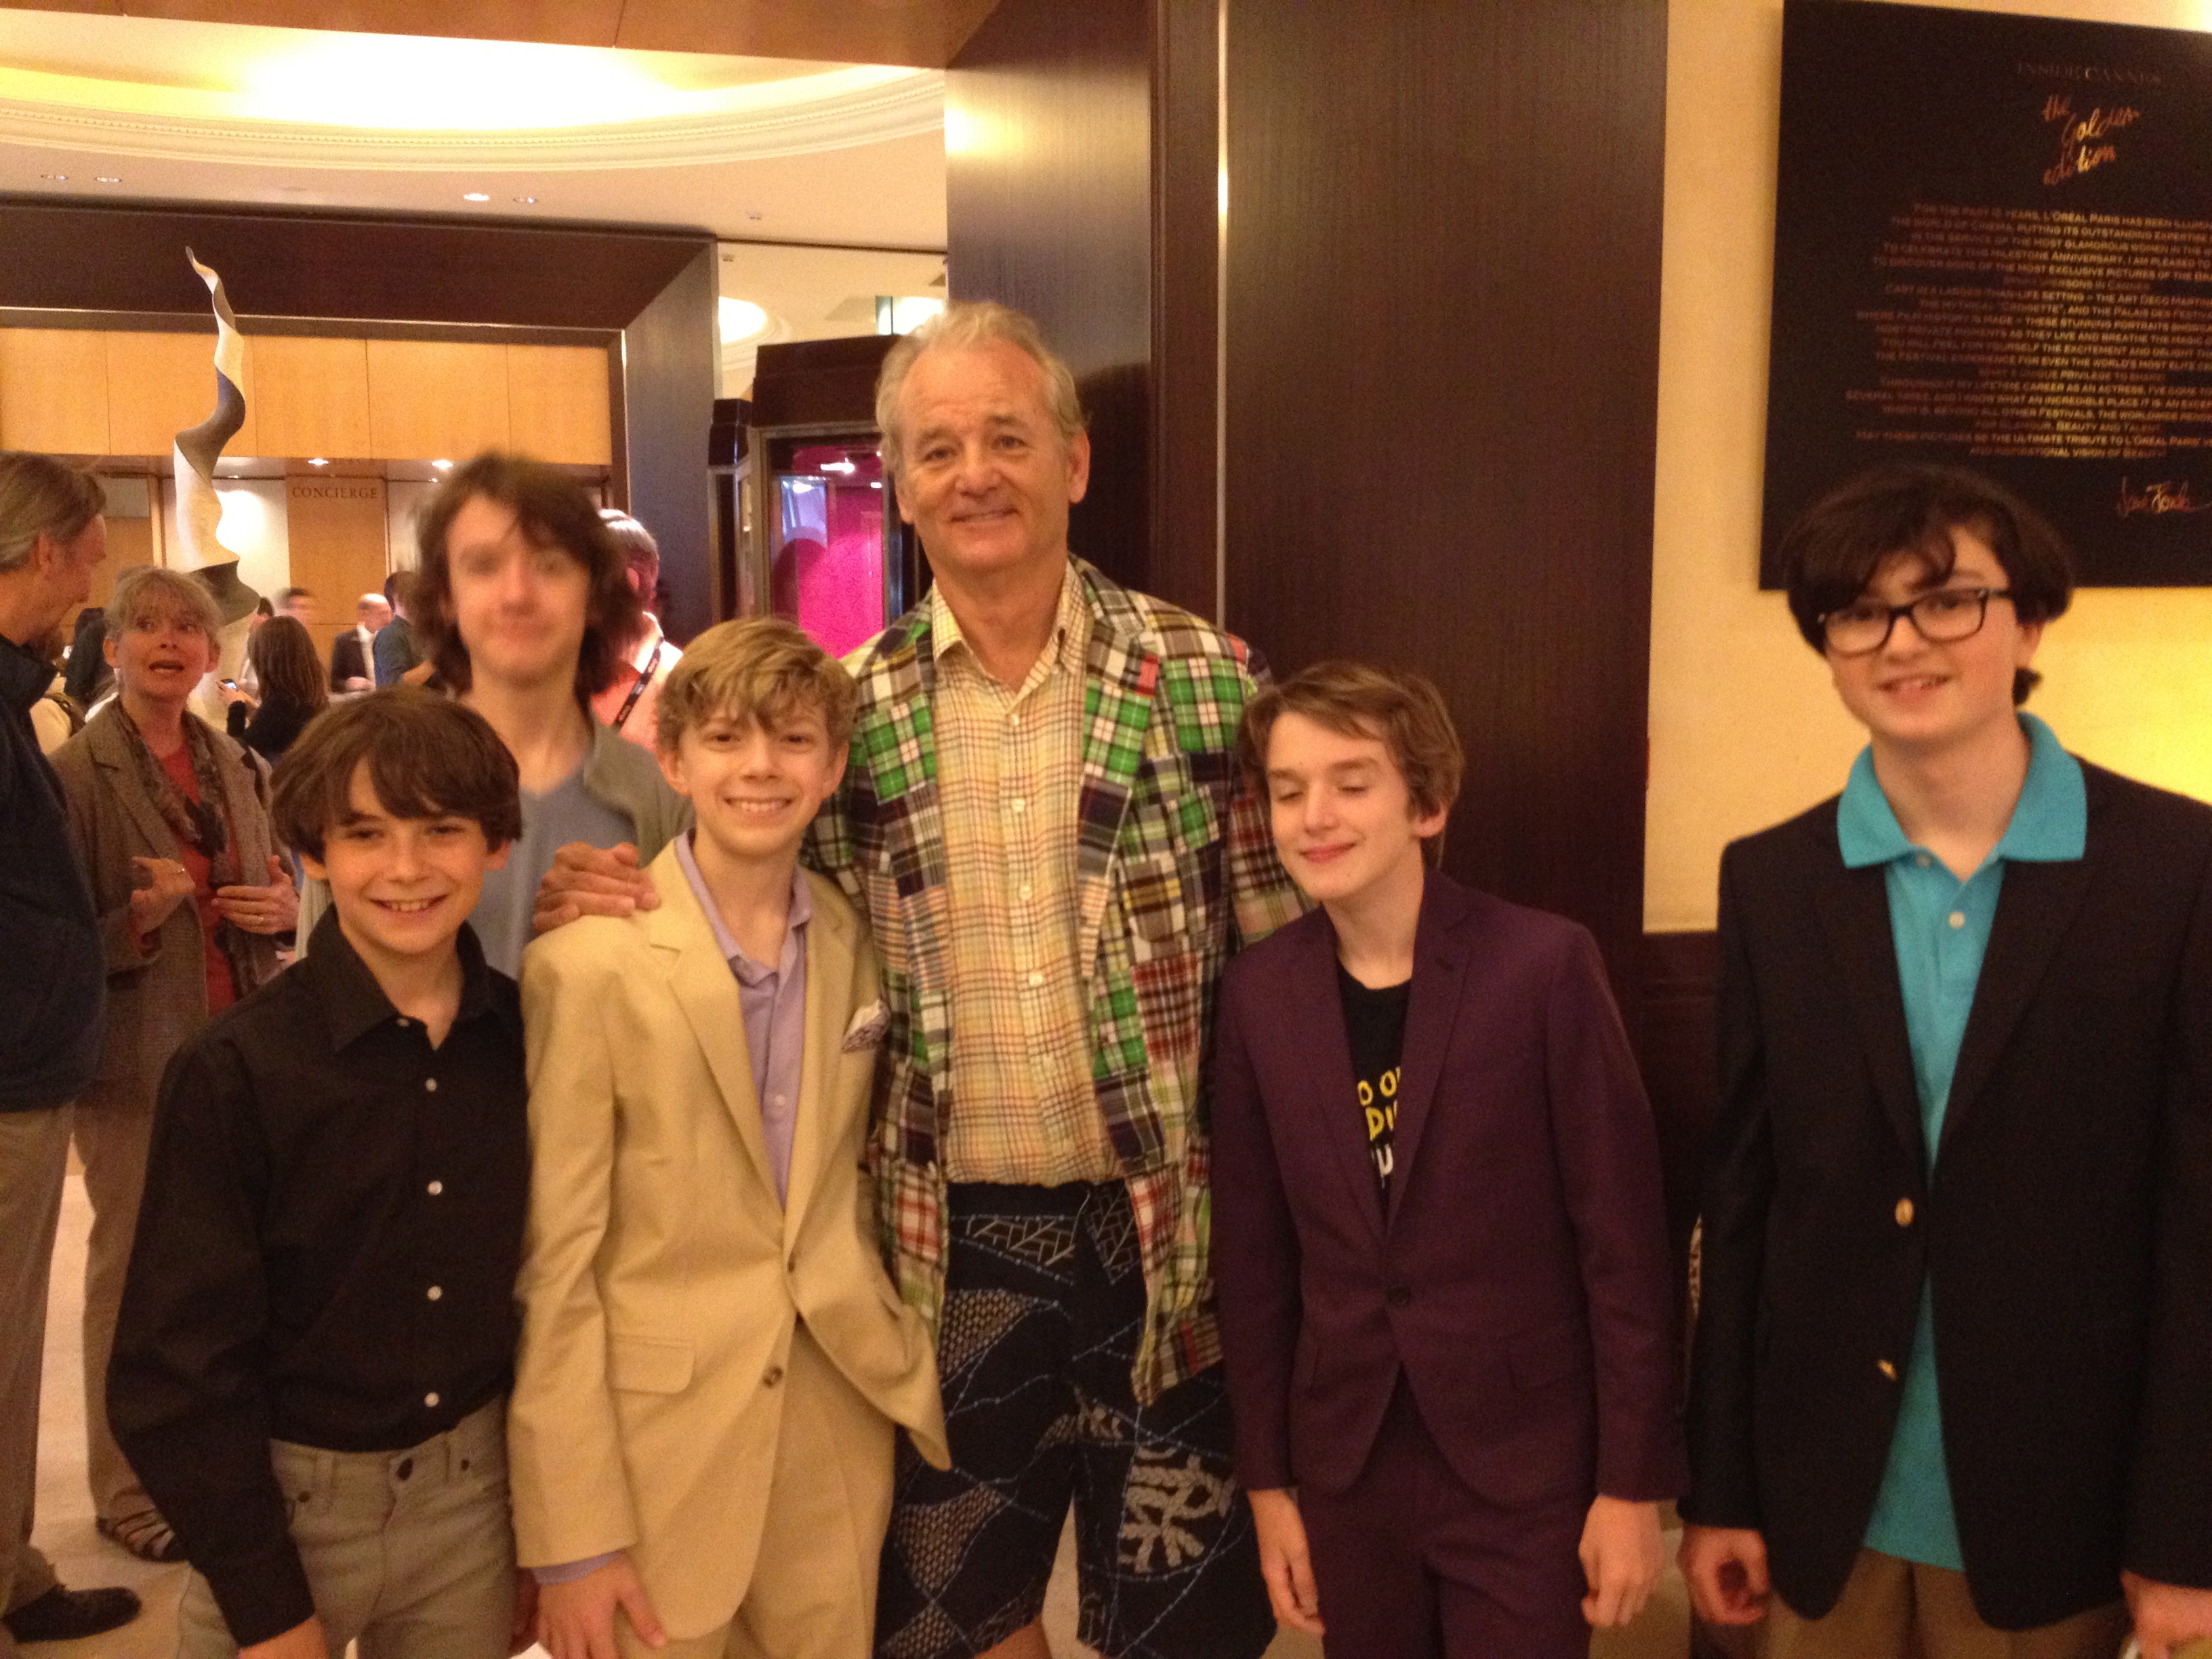 Gabe with Bill Murray and part of troop 55 from Moonrise